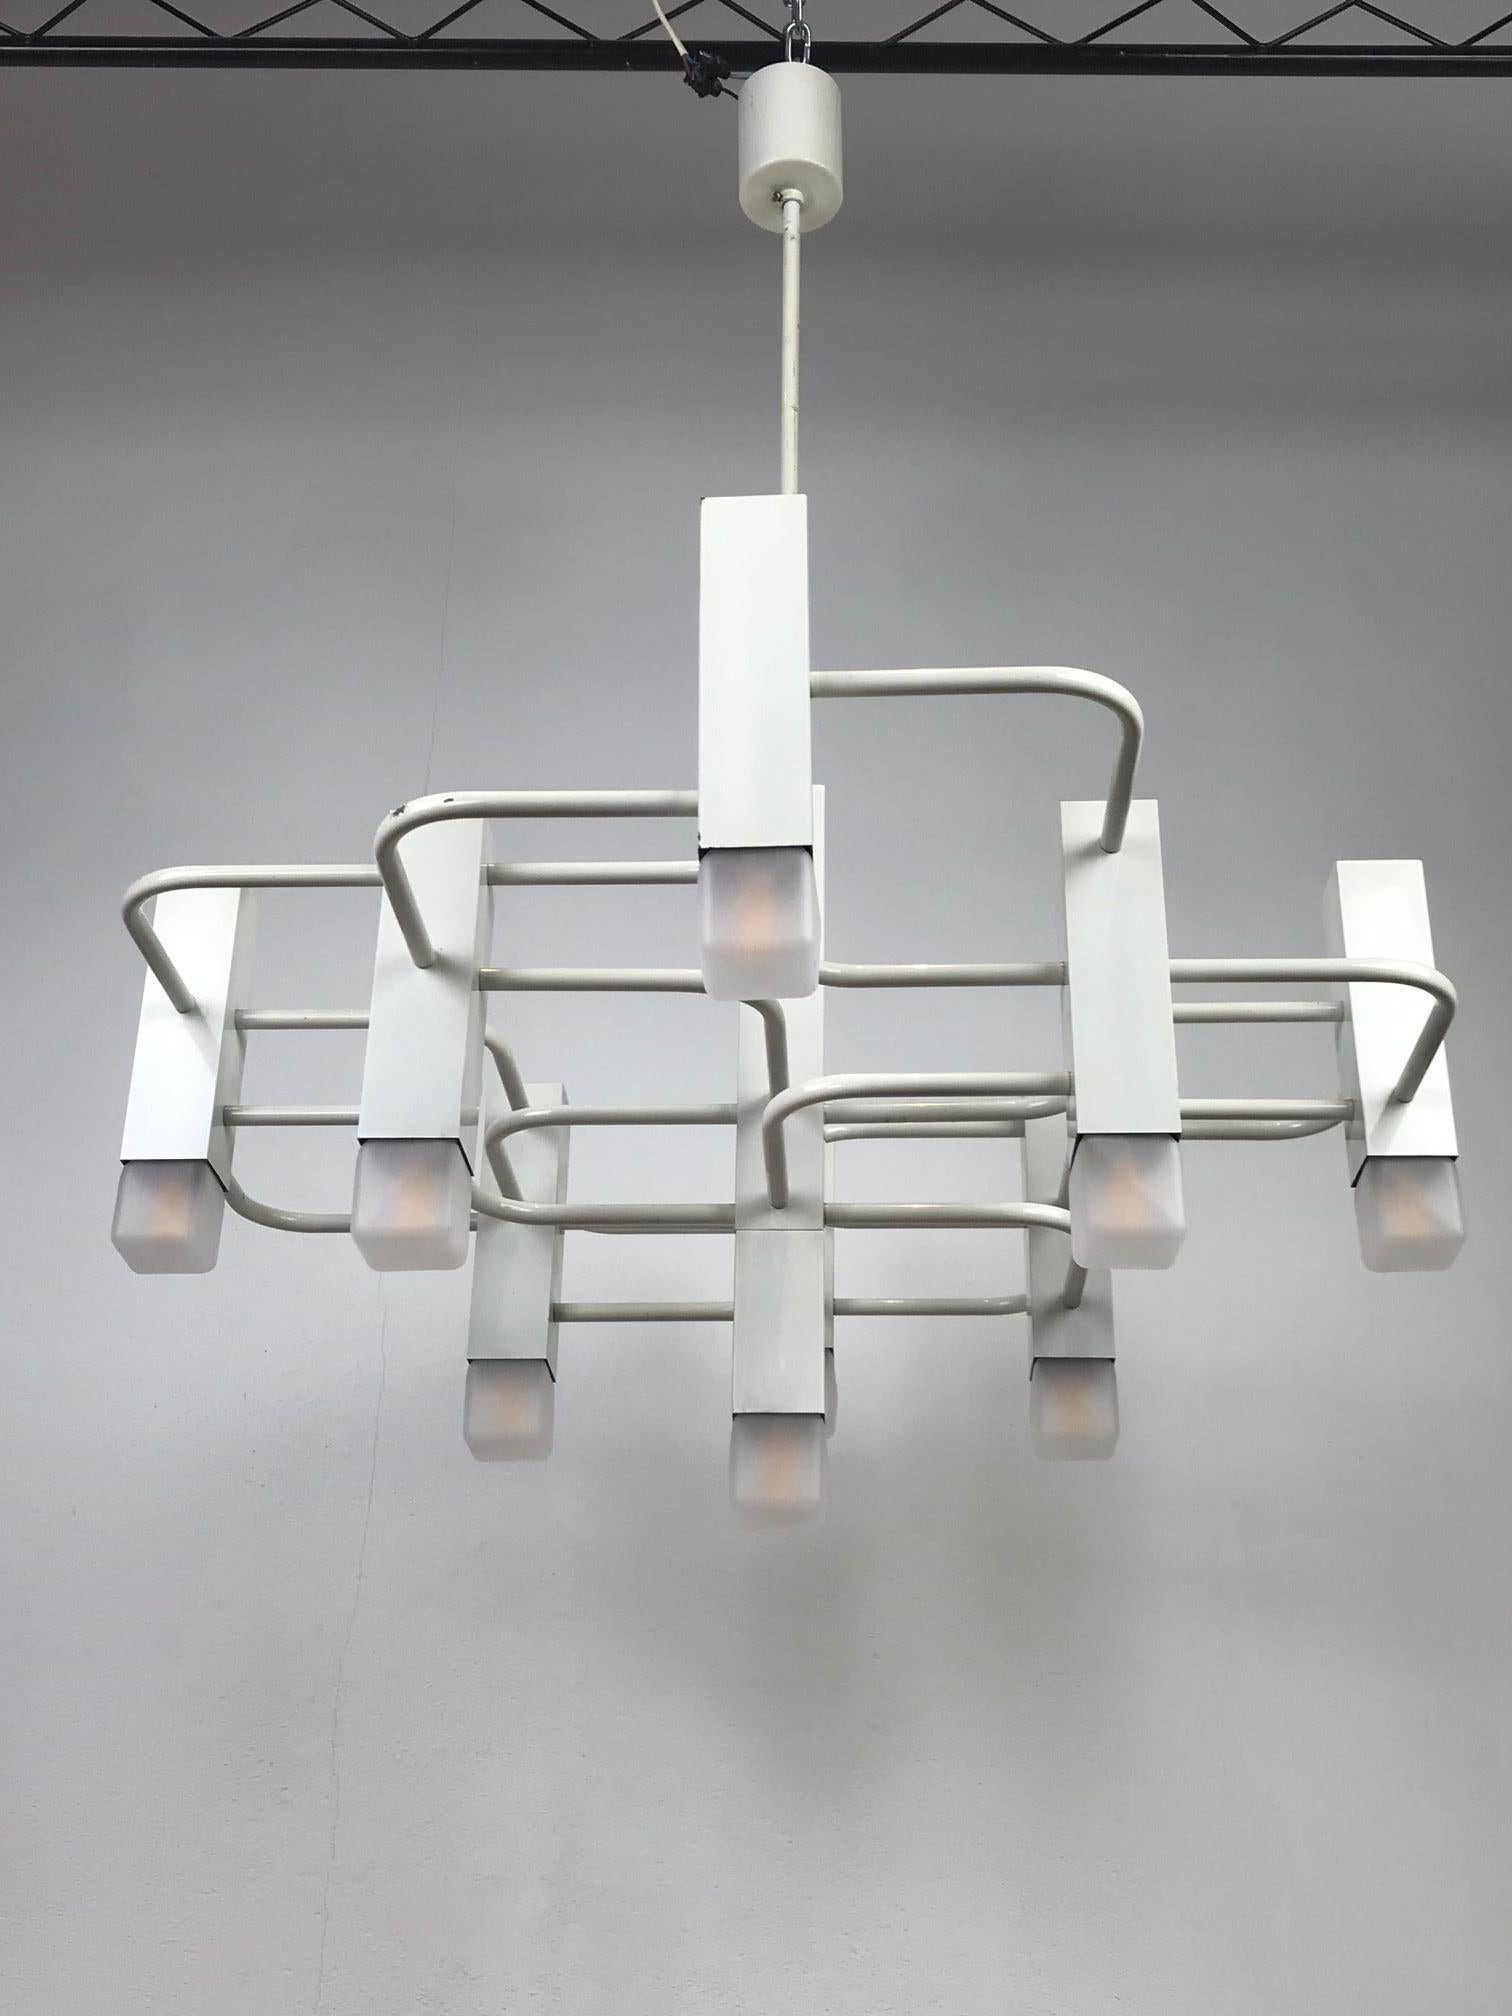 White lacquered SA Boulanger geometric chandelier designed by Gaetano Sciolari from the 1970s.

A good quality, great looking large Cubic or Geometric Sciolari Boulanger lamp or Boulanger chandelier which fits great in a modern, design or eclectic